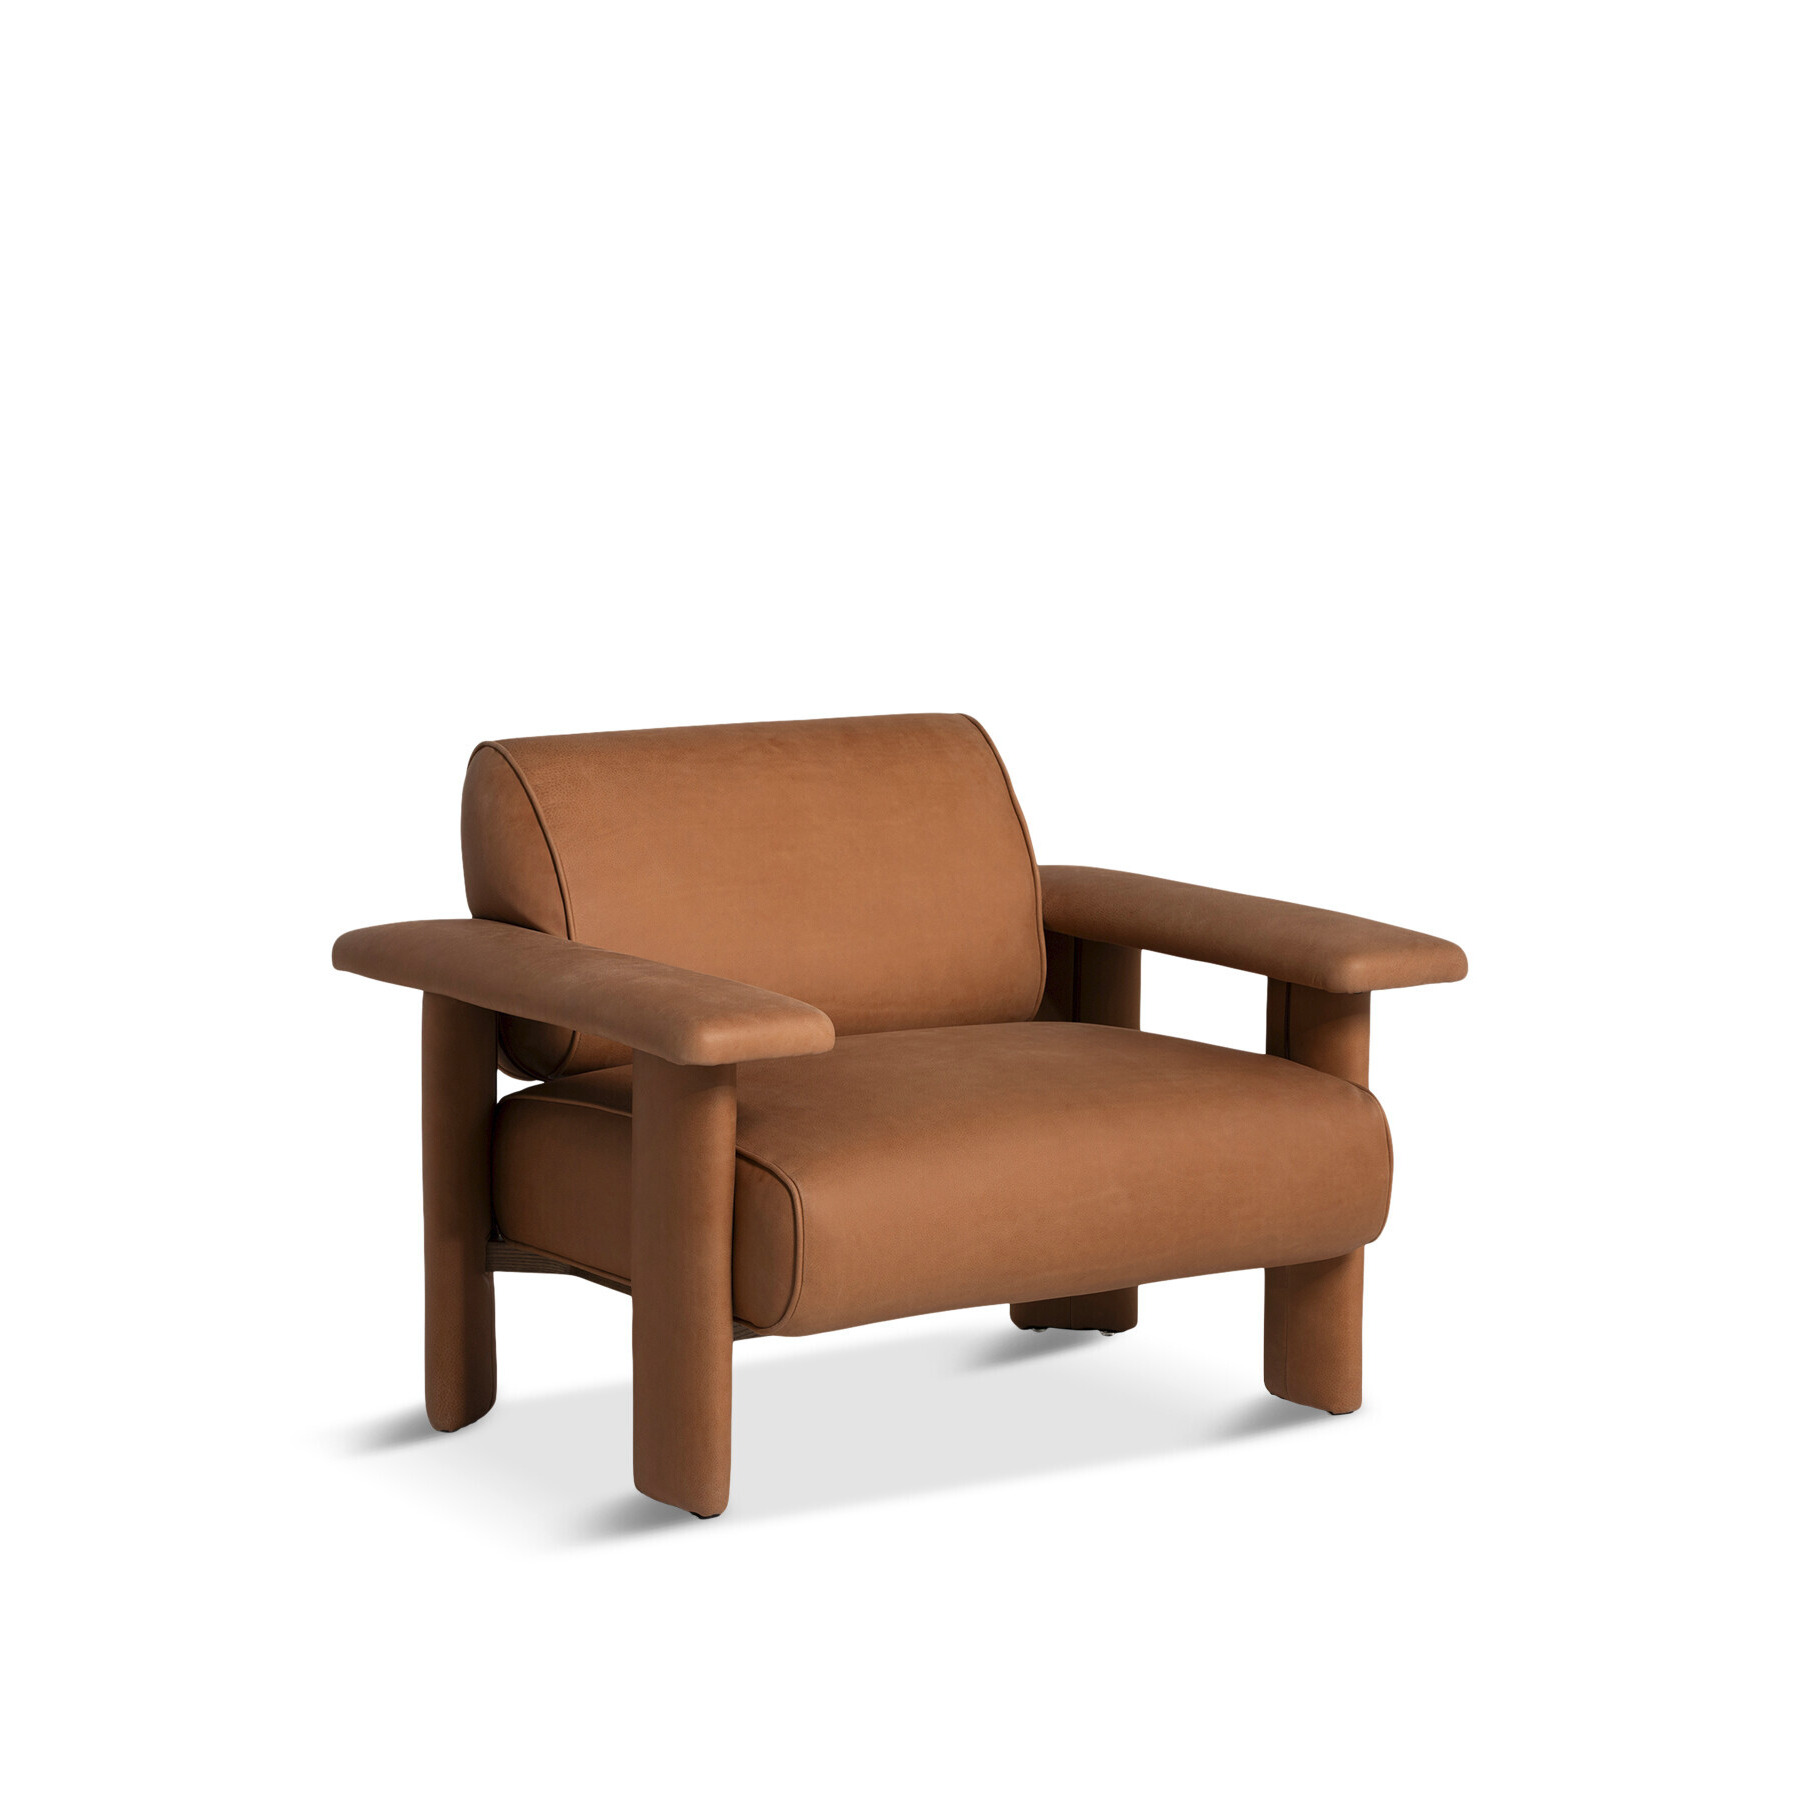 Barker and Stonehouse Eldrid Brown Leather Armchair with Wide Armrests - image 1